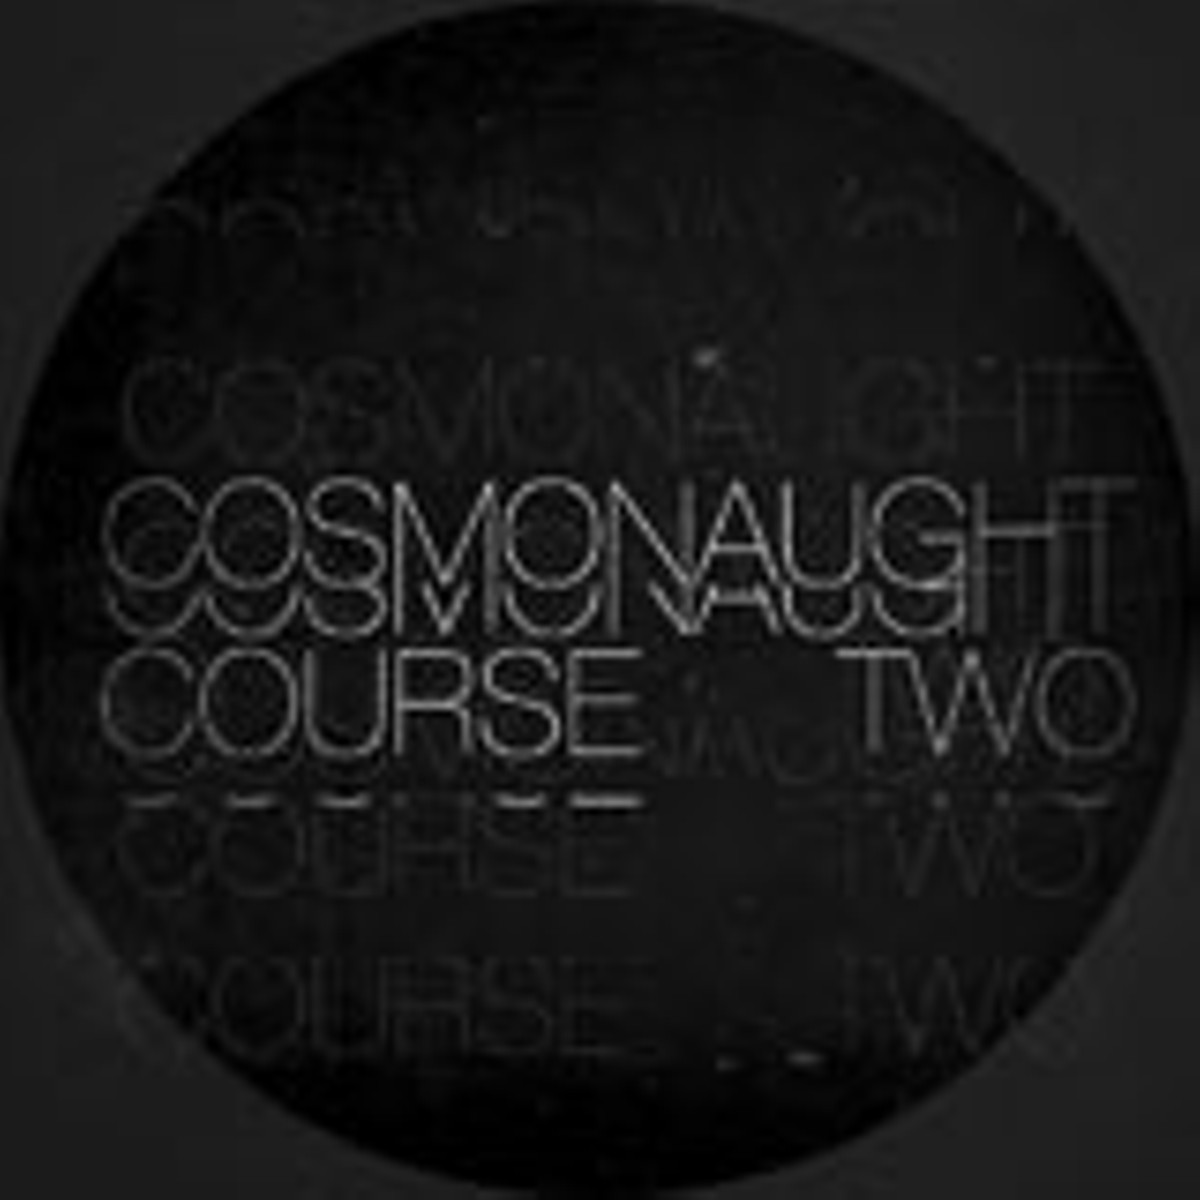 Cosmonaught: Course Two